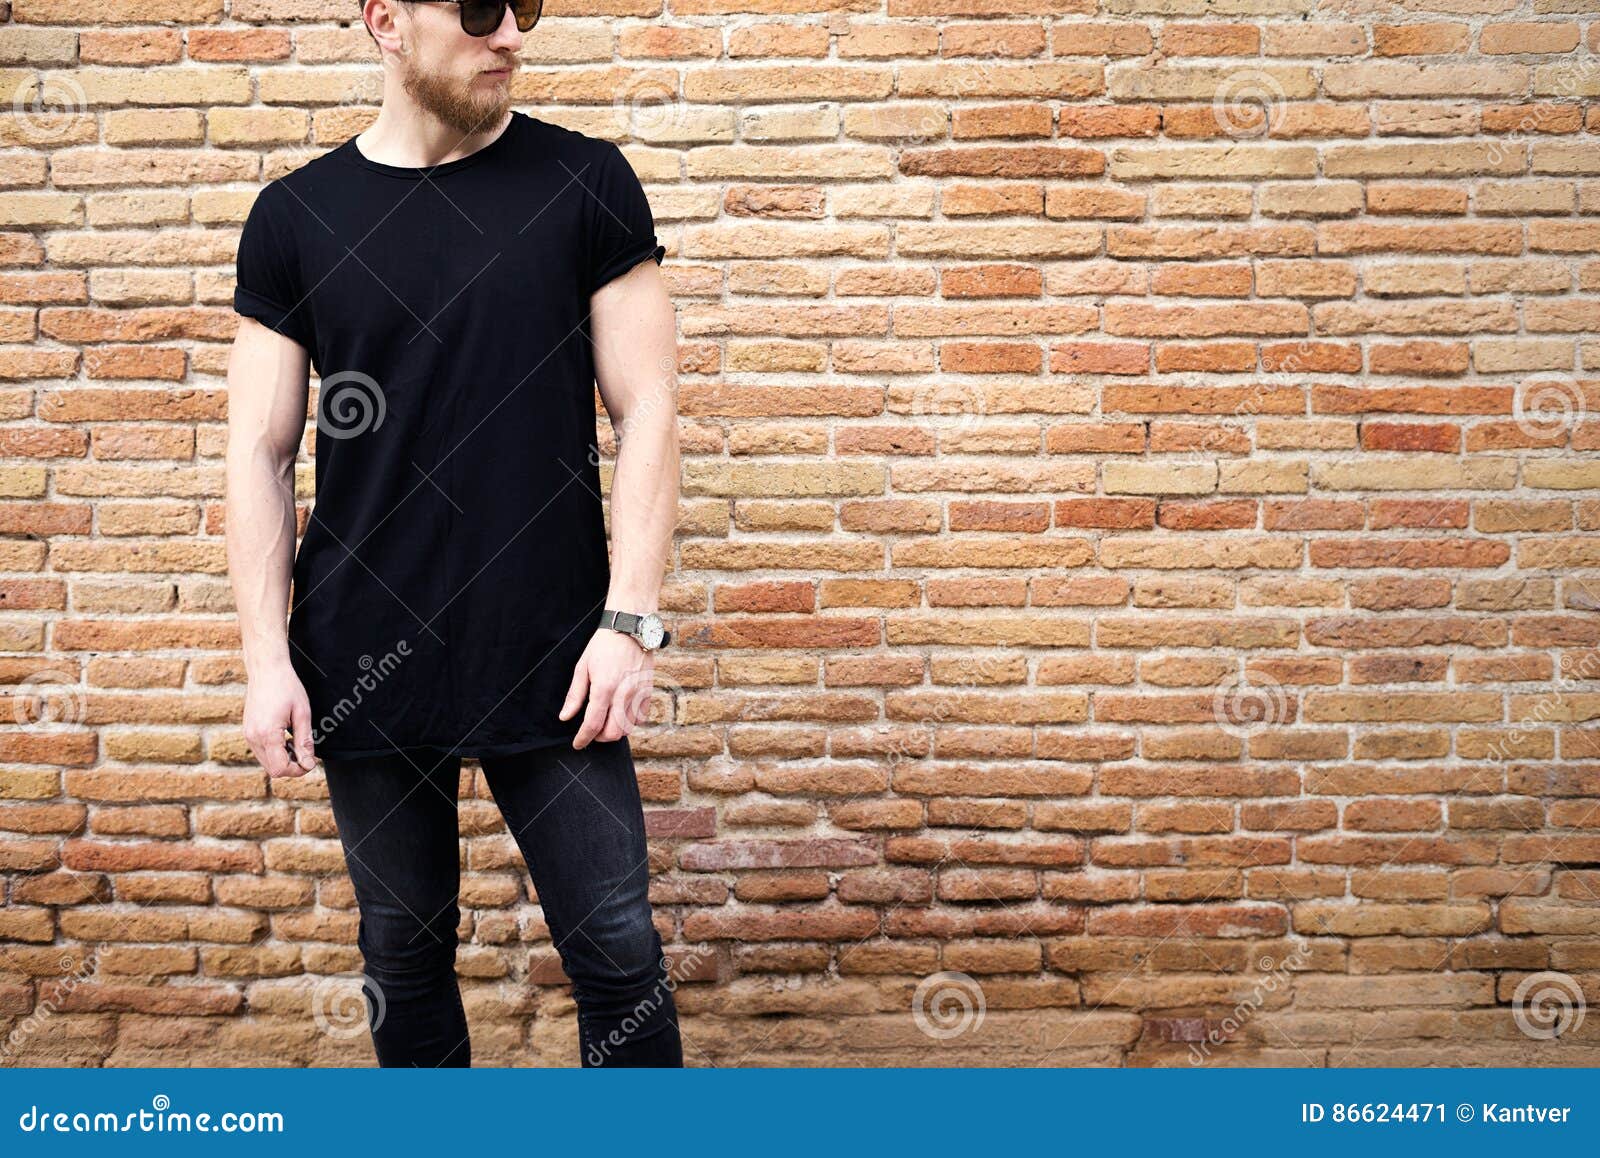 young muscular man wearing black tshirt,sunglasses and jeans posing outside. empty brown grunge brick wall on the